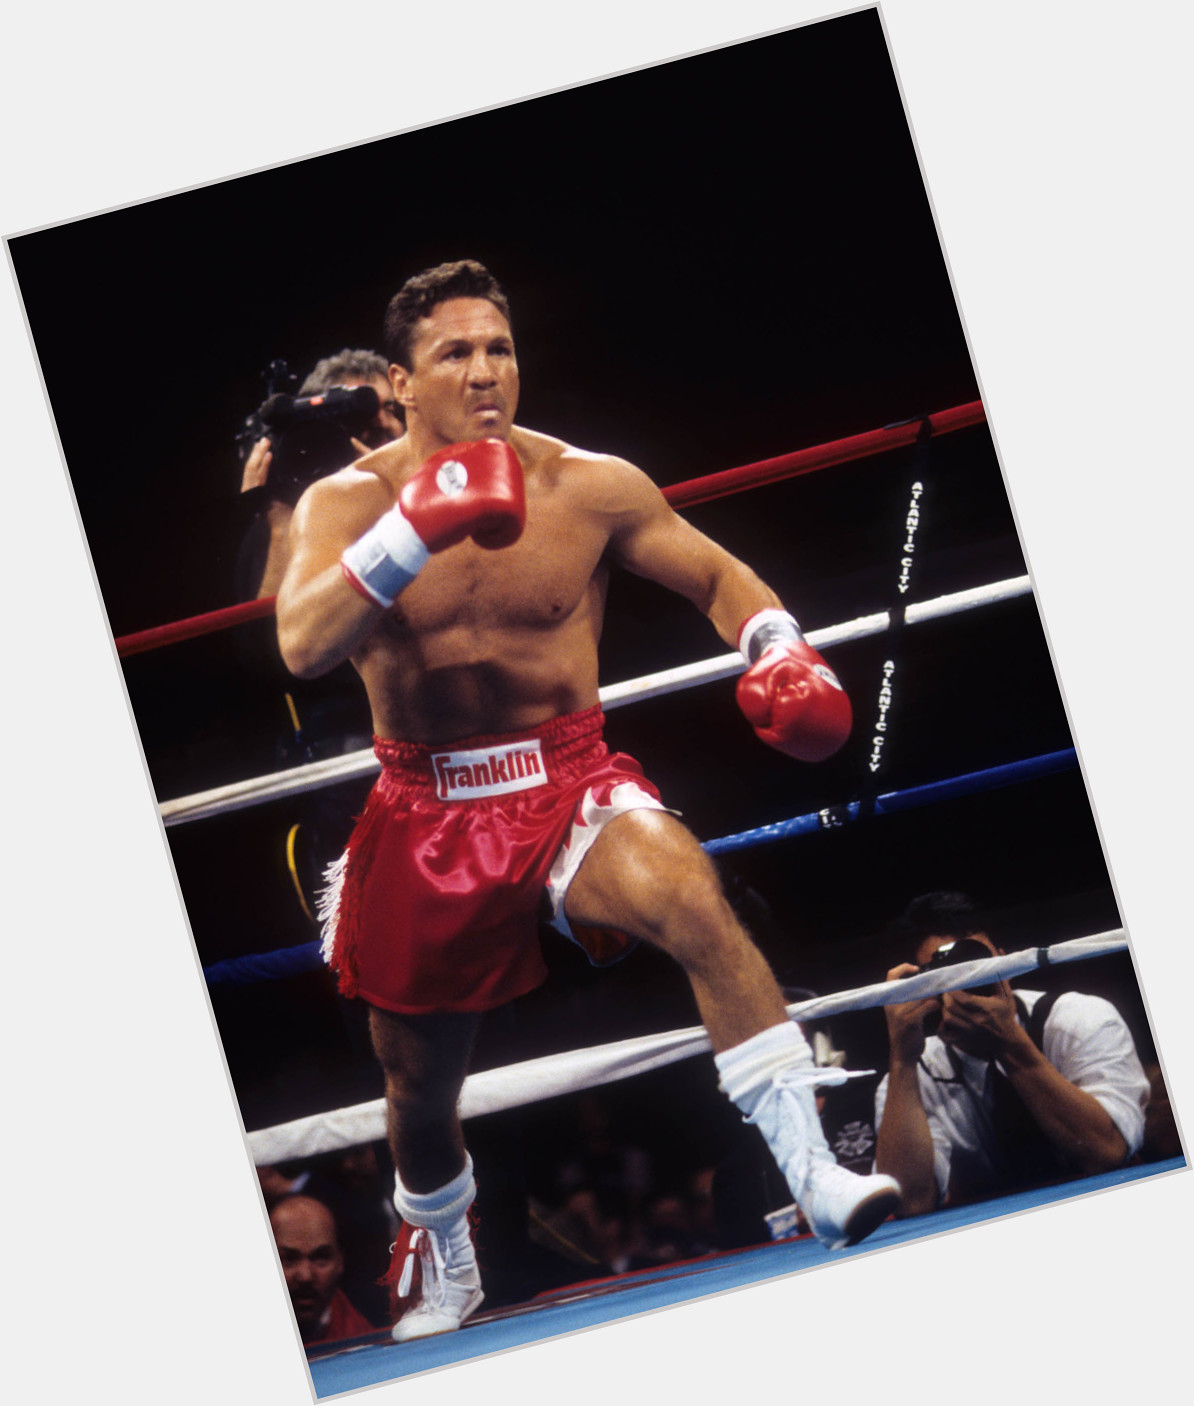 Happy Birthday to the one and only Vinny Paz! You are a boxing legend. Have a great day champ! 